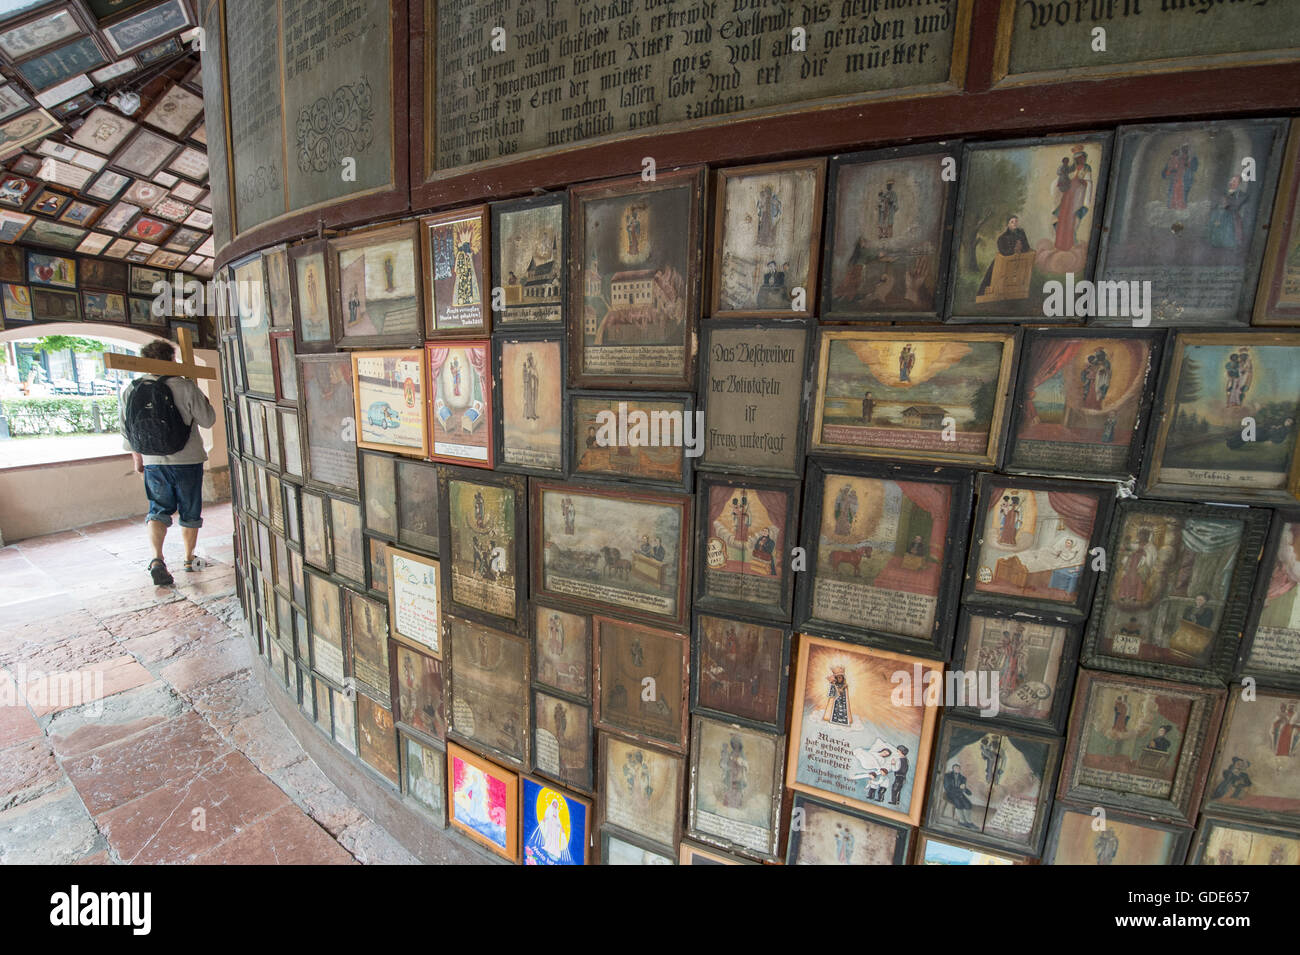 Altotting, Germany. 14th July, 2016. A man walks through the gallery around the chapel of grace in the pilgramage destination of Altotting, Germany, 14 July 2016. The gallery shows up tol 500-years-old paintings honouring the Mother of God. Photo: Armin Weigel/dpa/Alamy Live News Stock Photo